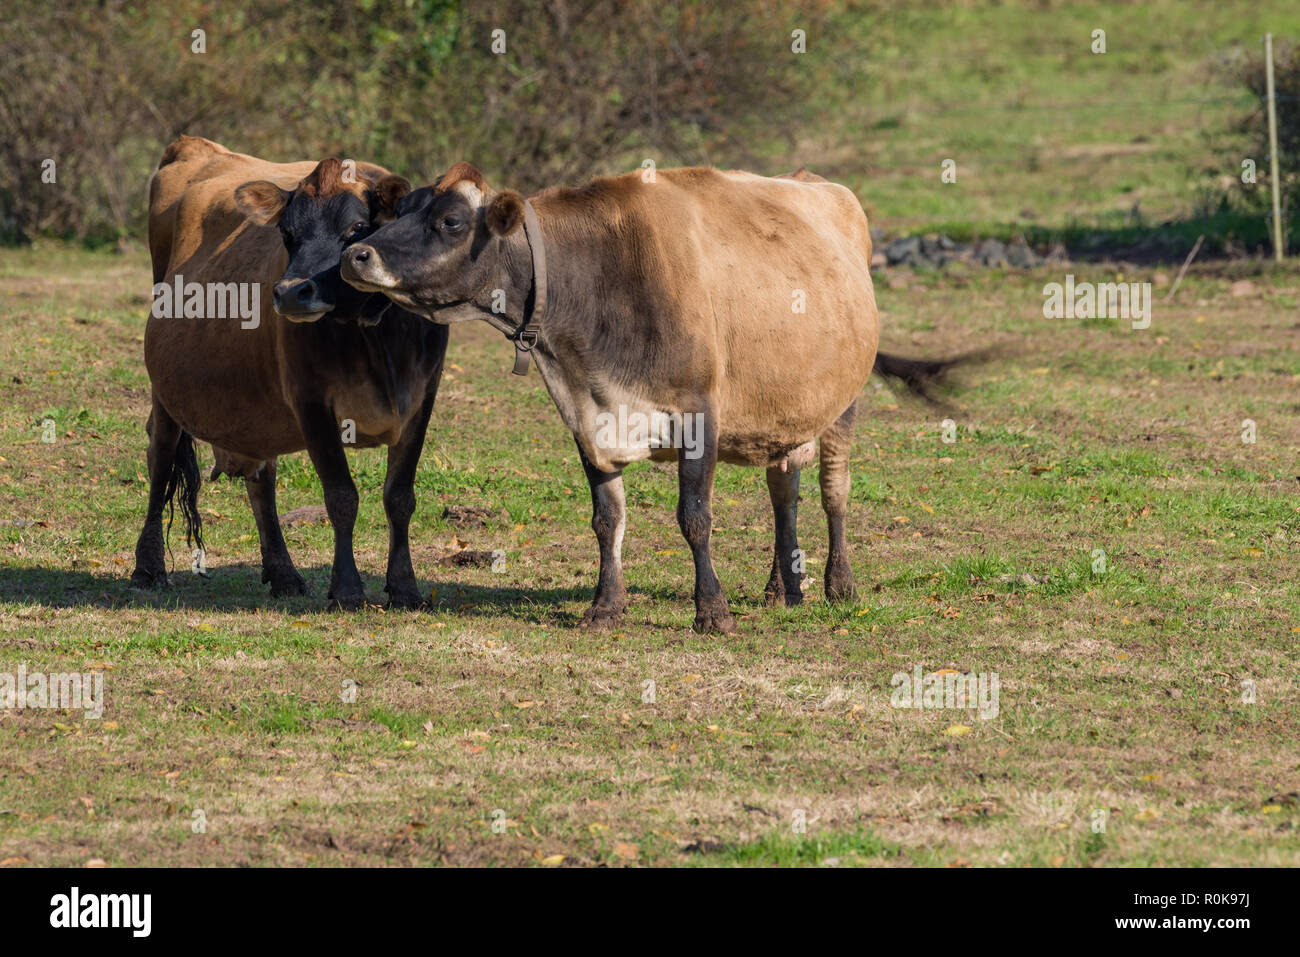 Two affectionate Jersey cows outside in pasture and nuzzling affectionately Stock Photo